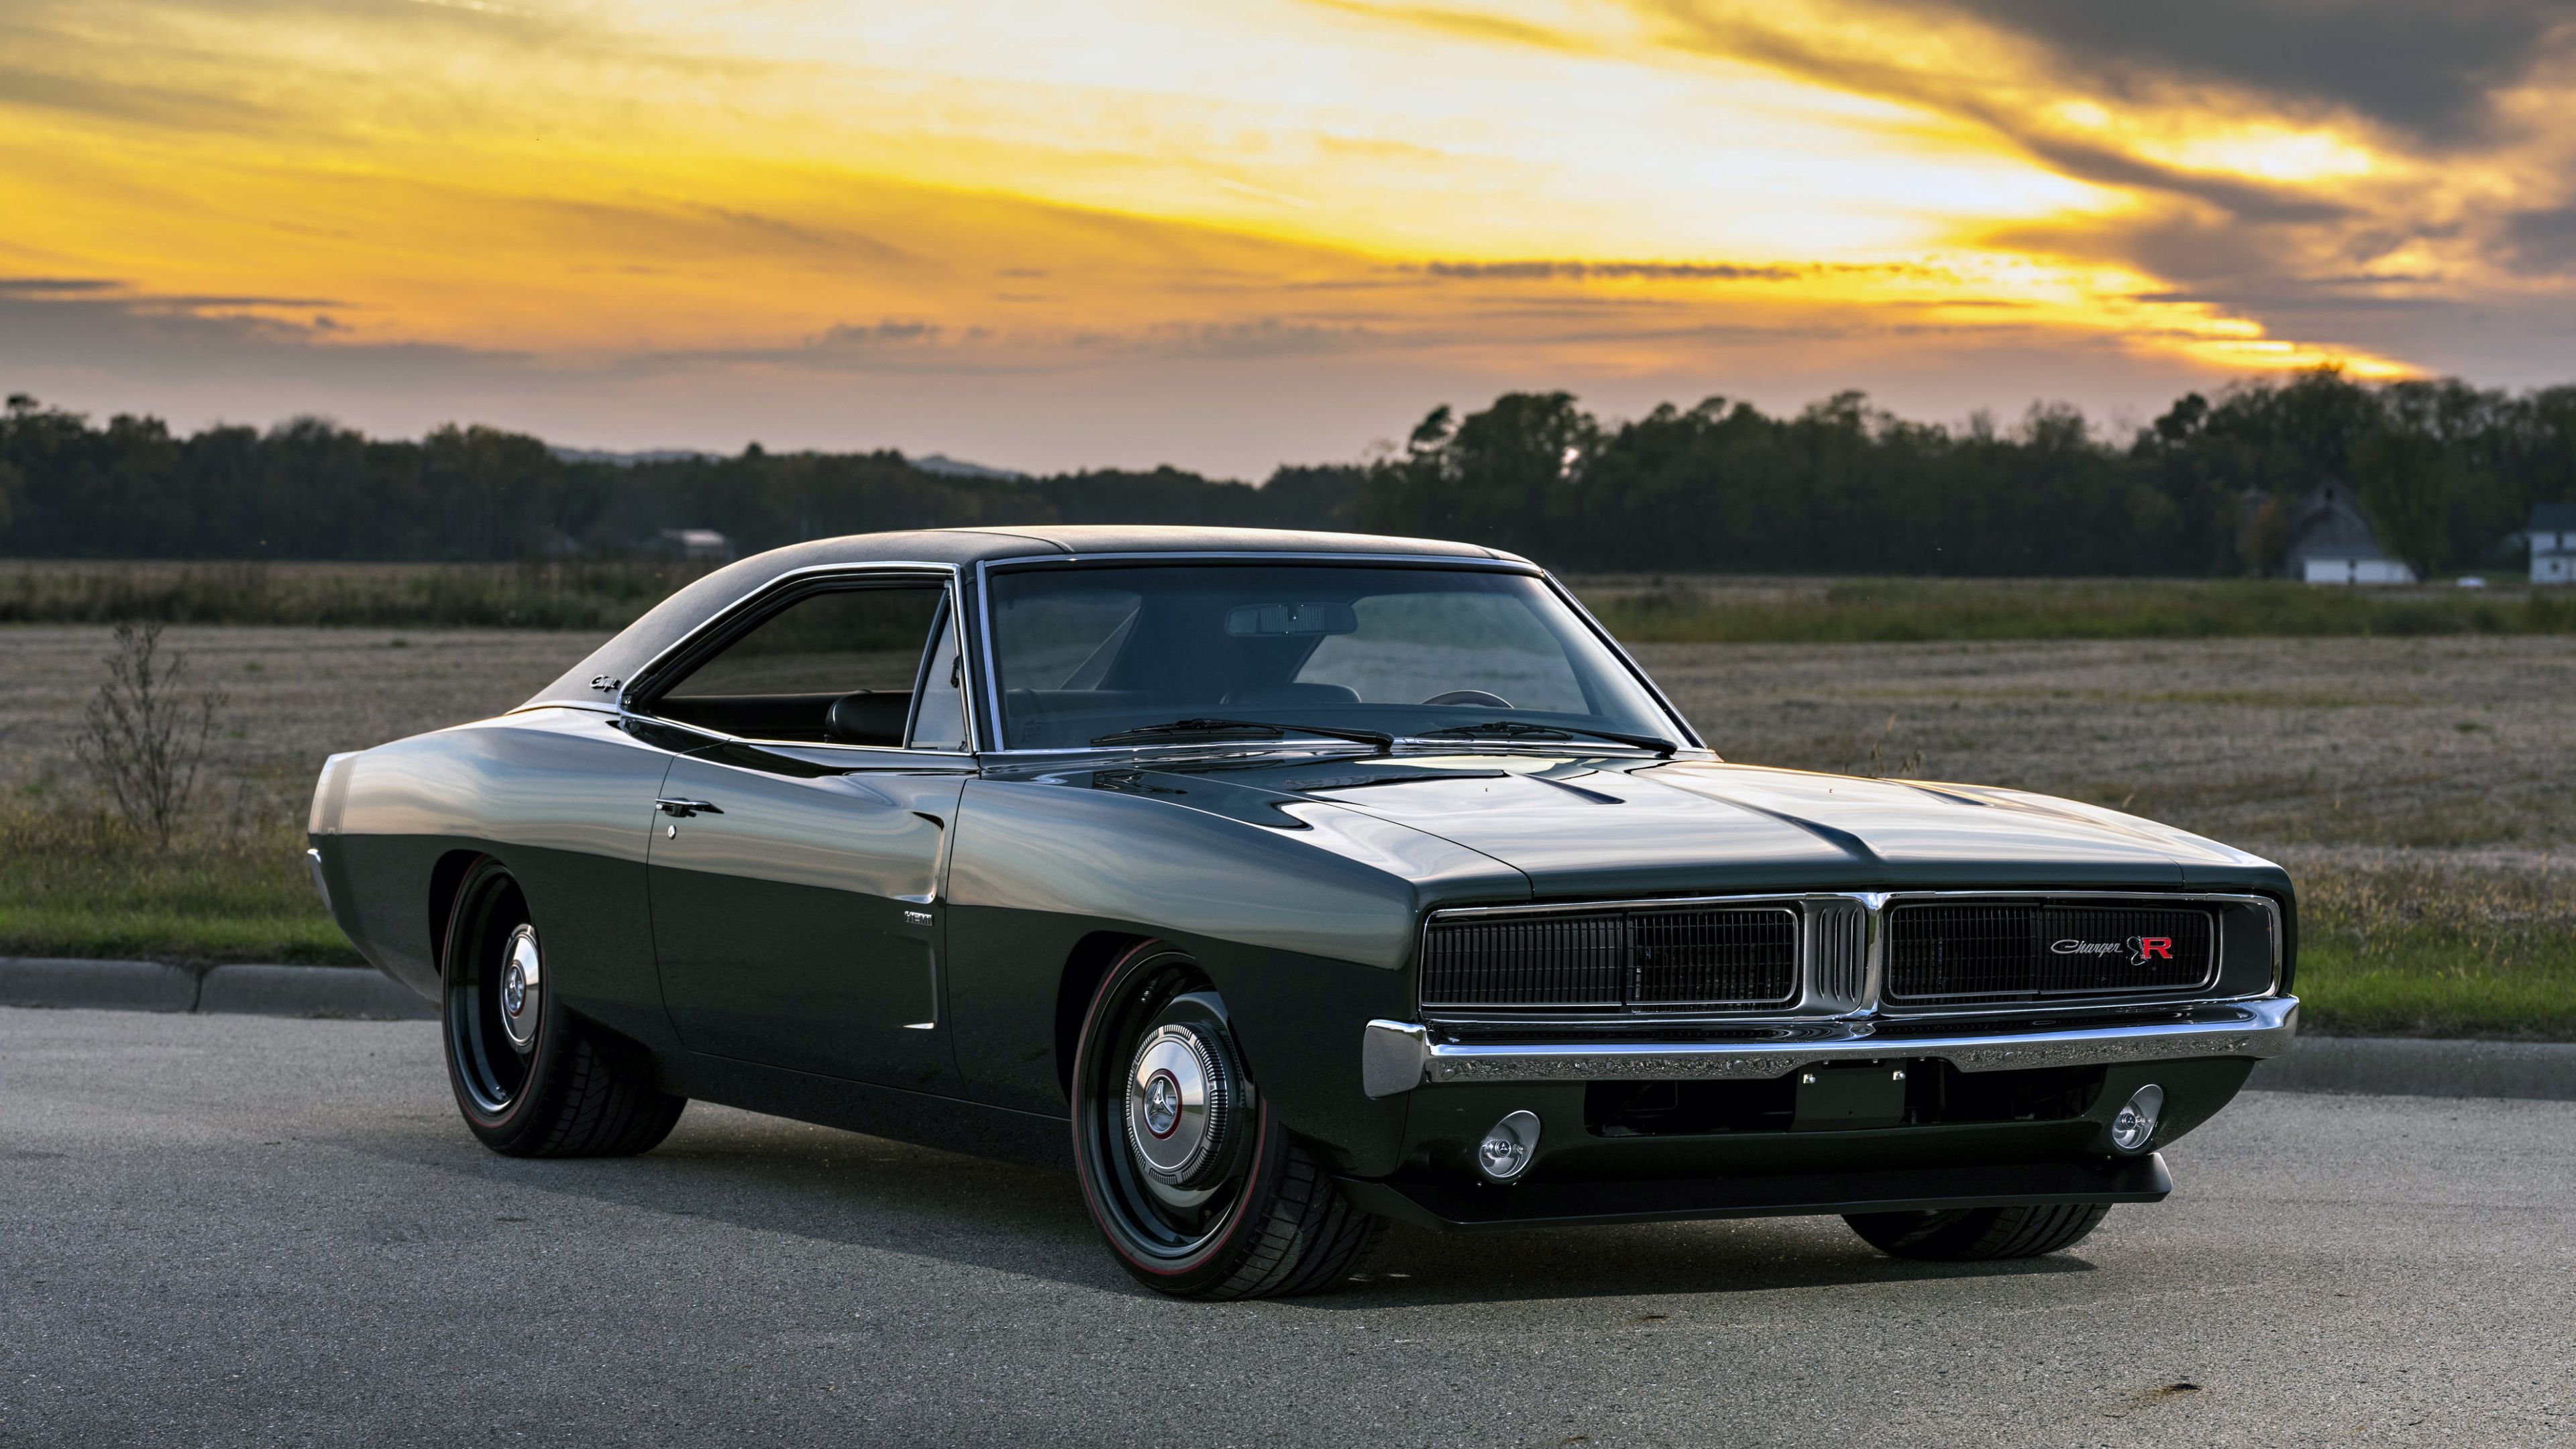 Dodge Charger 1969 Wallpaper Free Dodge Charger 1969 Background